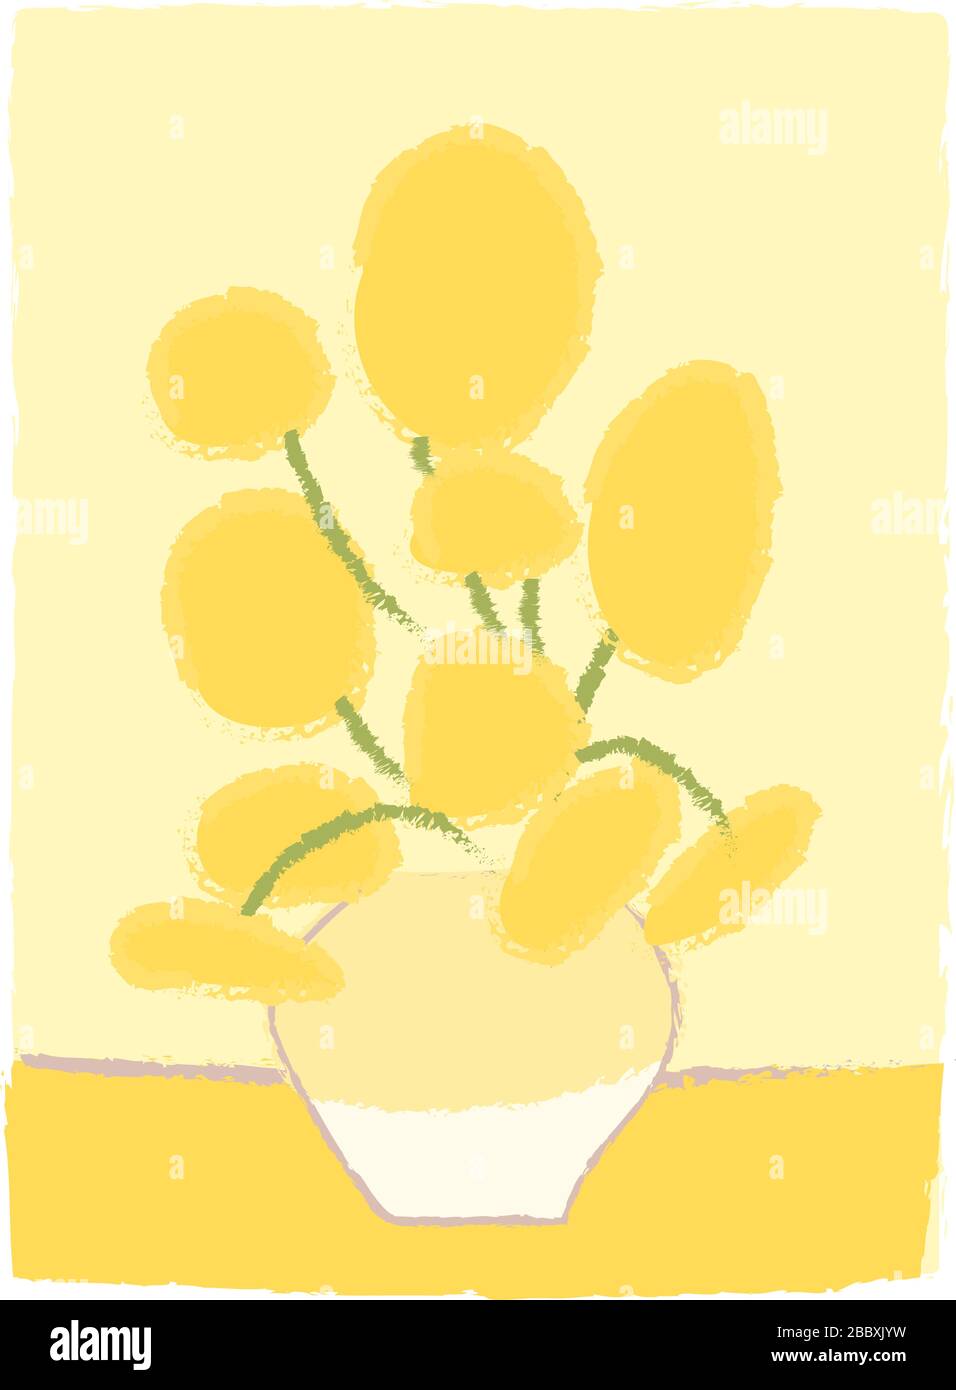 Sunflowers Van Gogh imitation like child s drawing in cartoon style. Impressionism painting art. Yellow flowers in vase. Bouquet Greeting card decoration. Simple vector stylized design isolated. Stock Vector